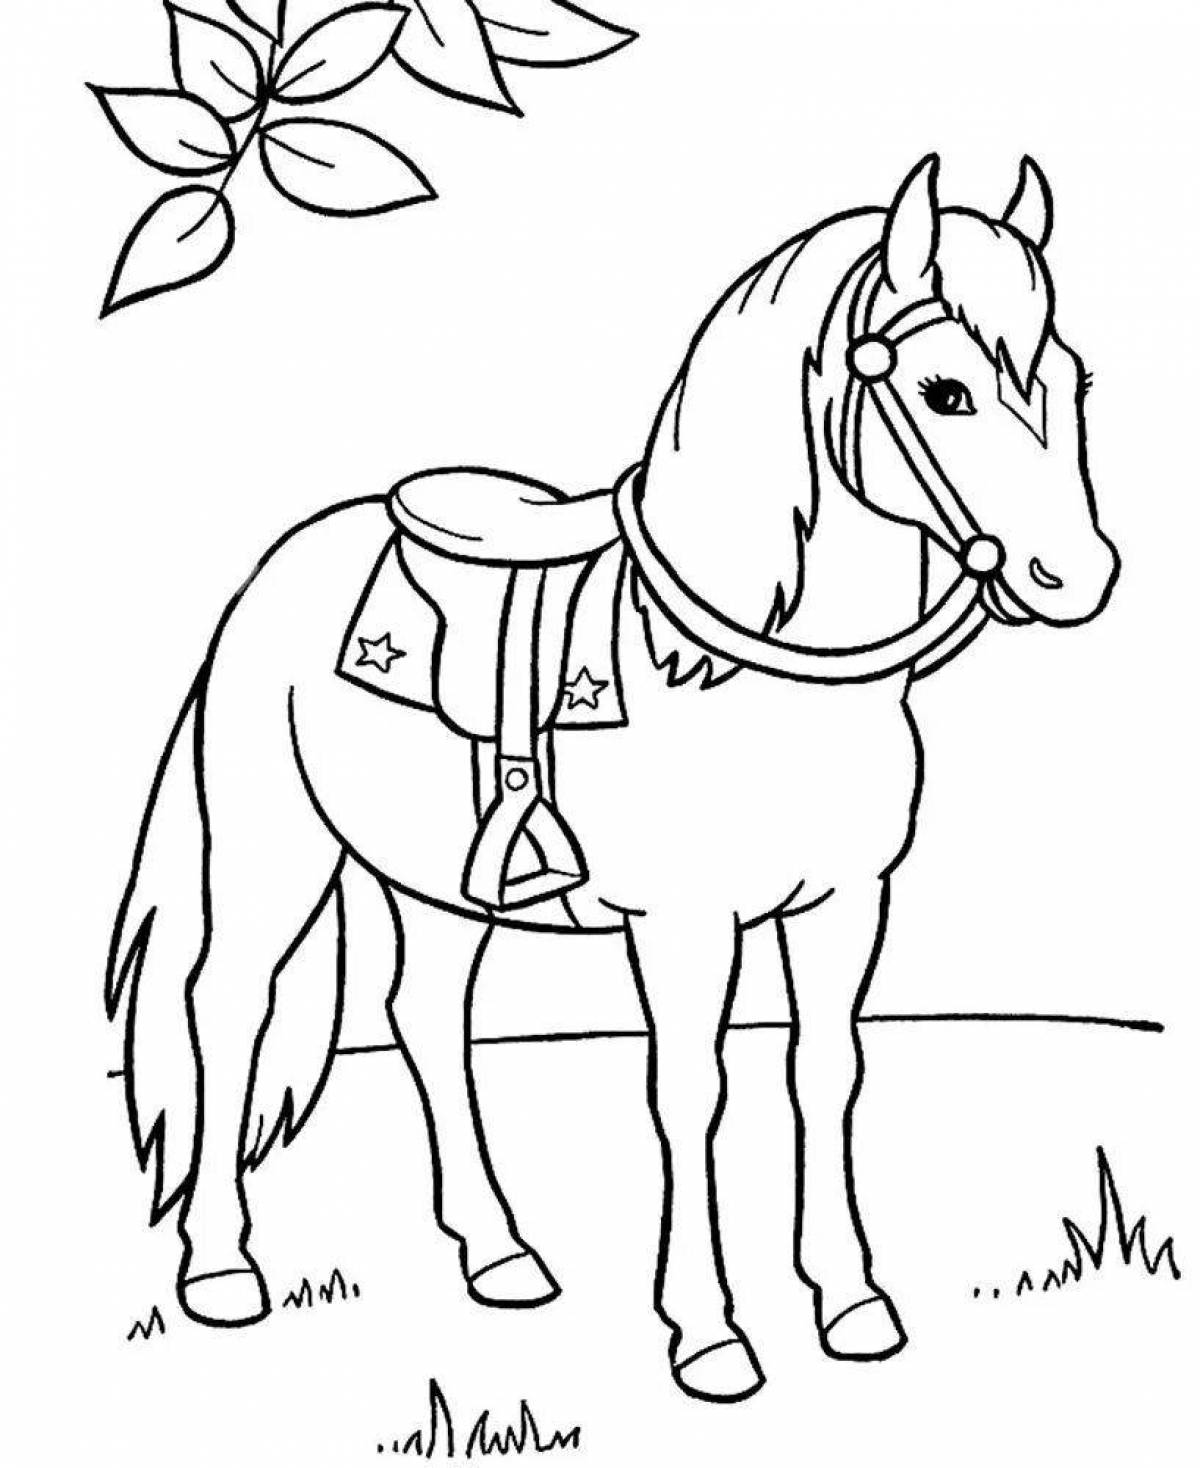 Attractive beetle coloring pages